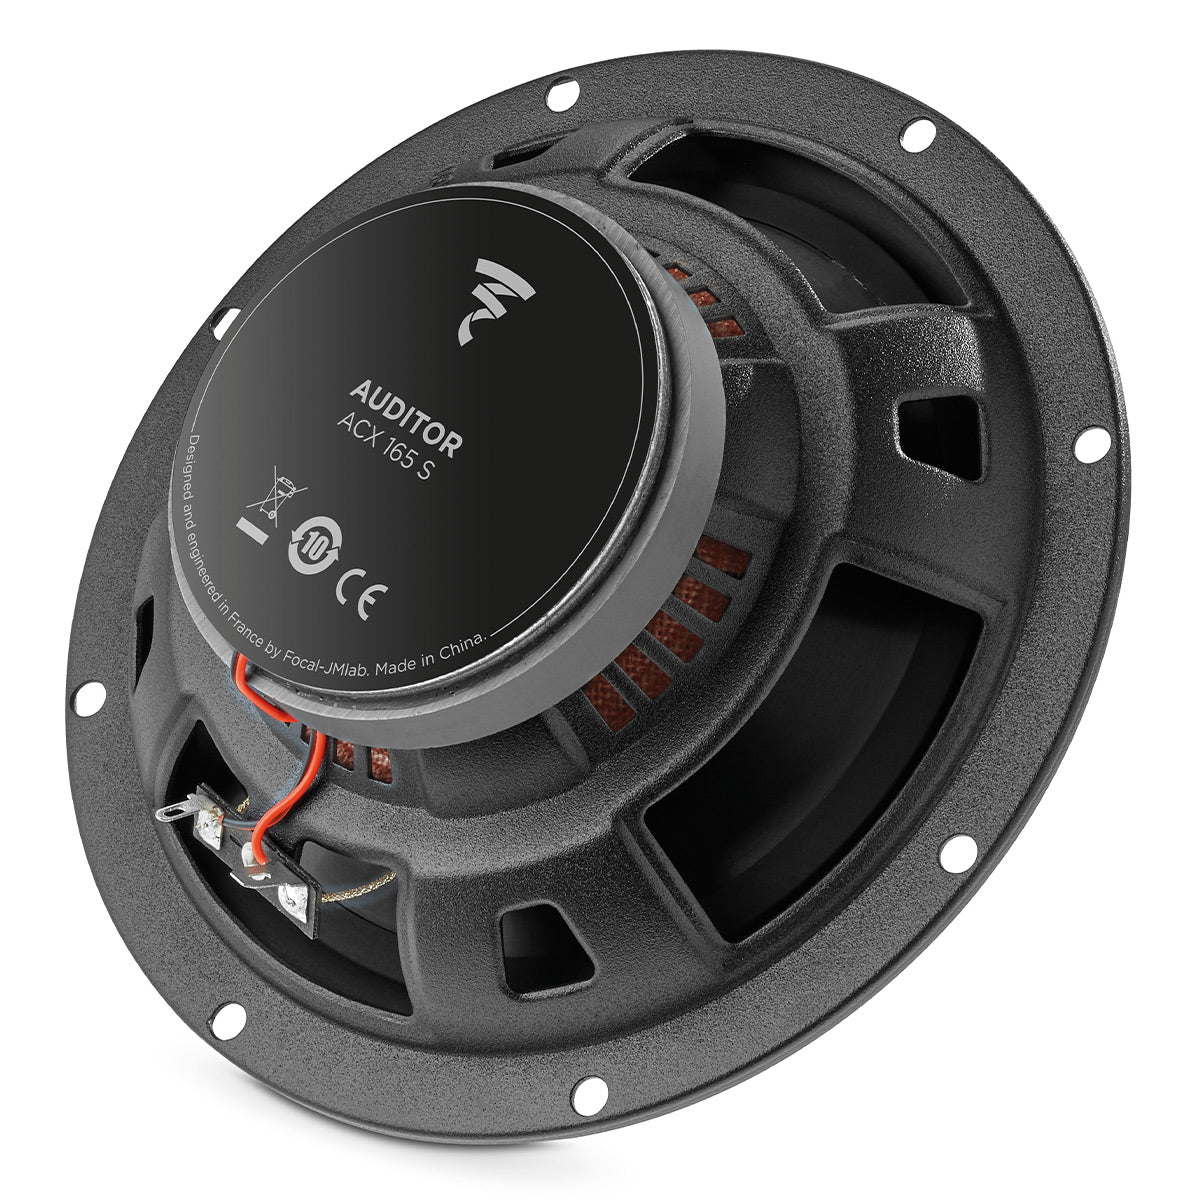 Focal ACX 165 S 6.5" 2-Way Coaxial Compact Kit